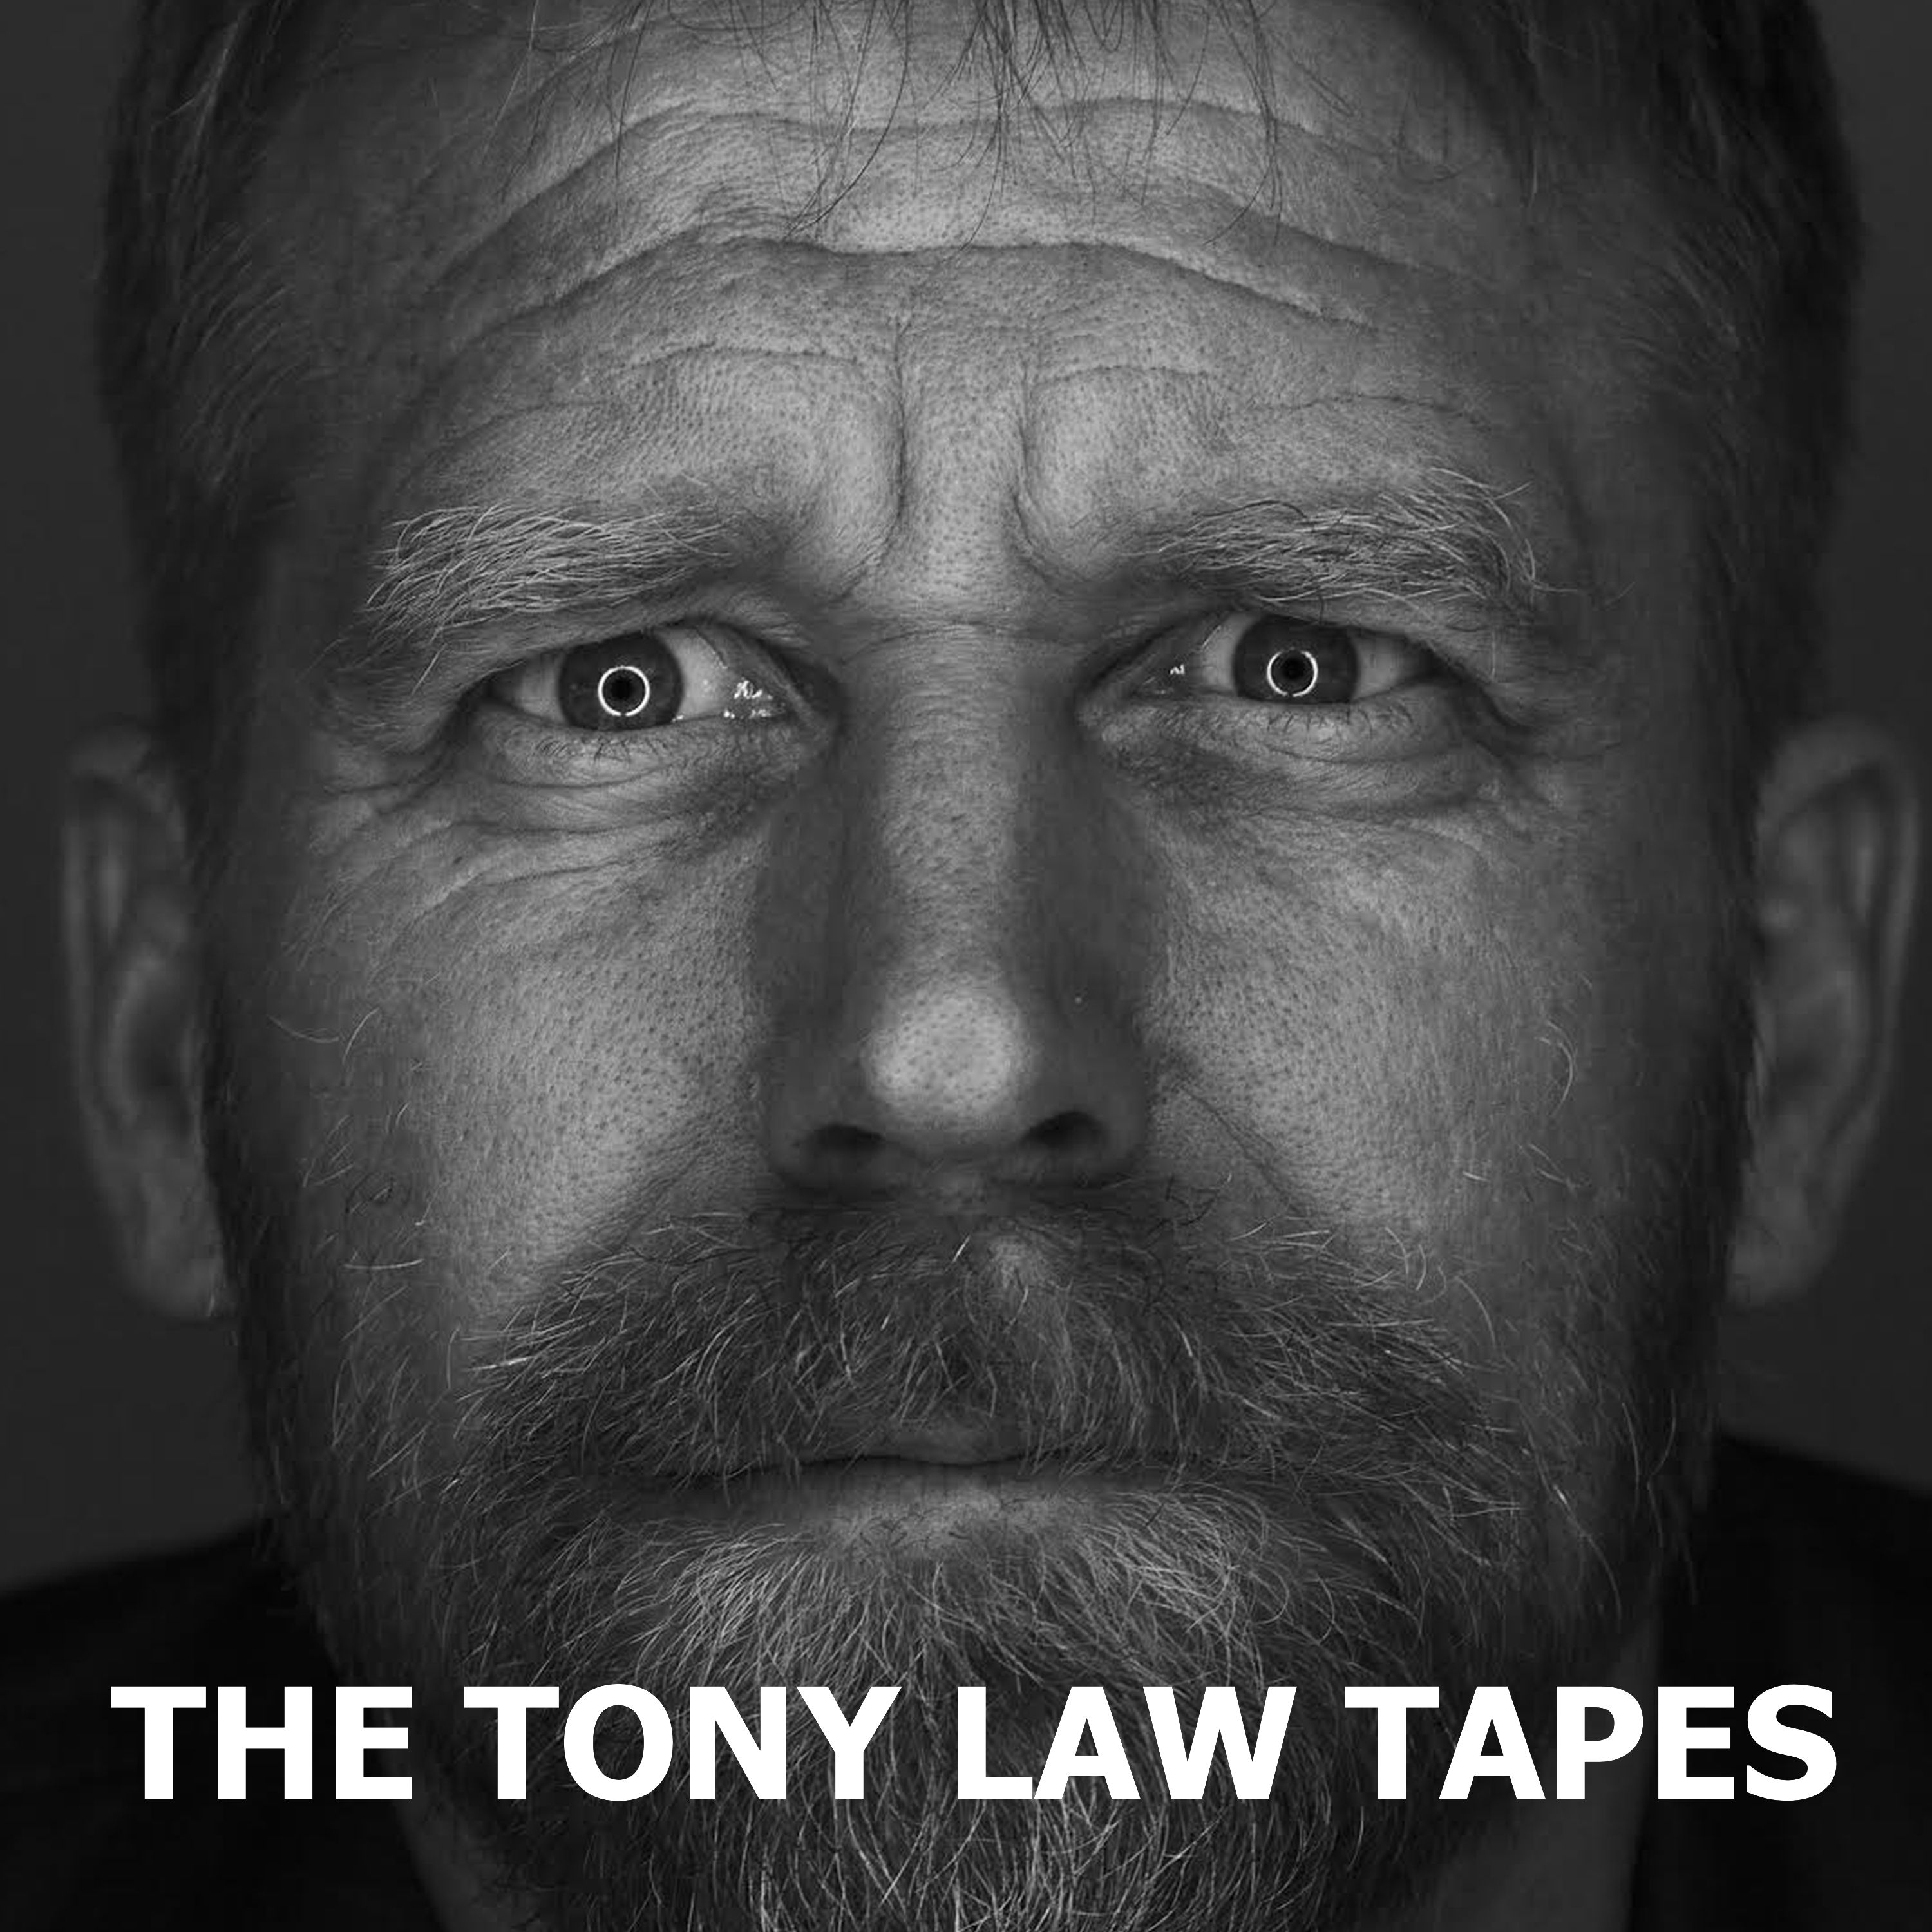 The Tony Law Tapes - Trailer